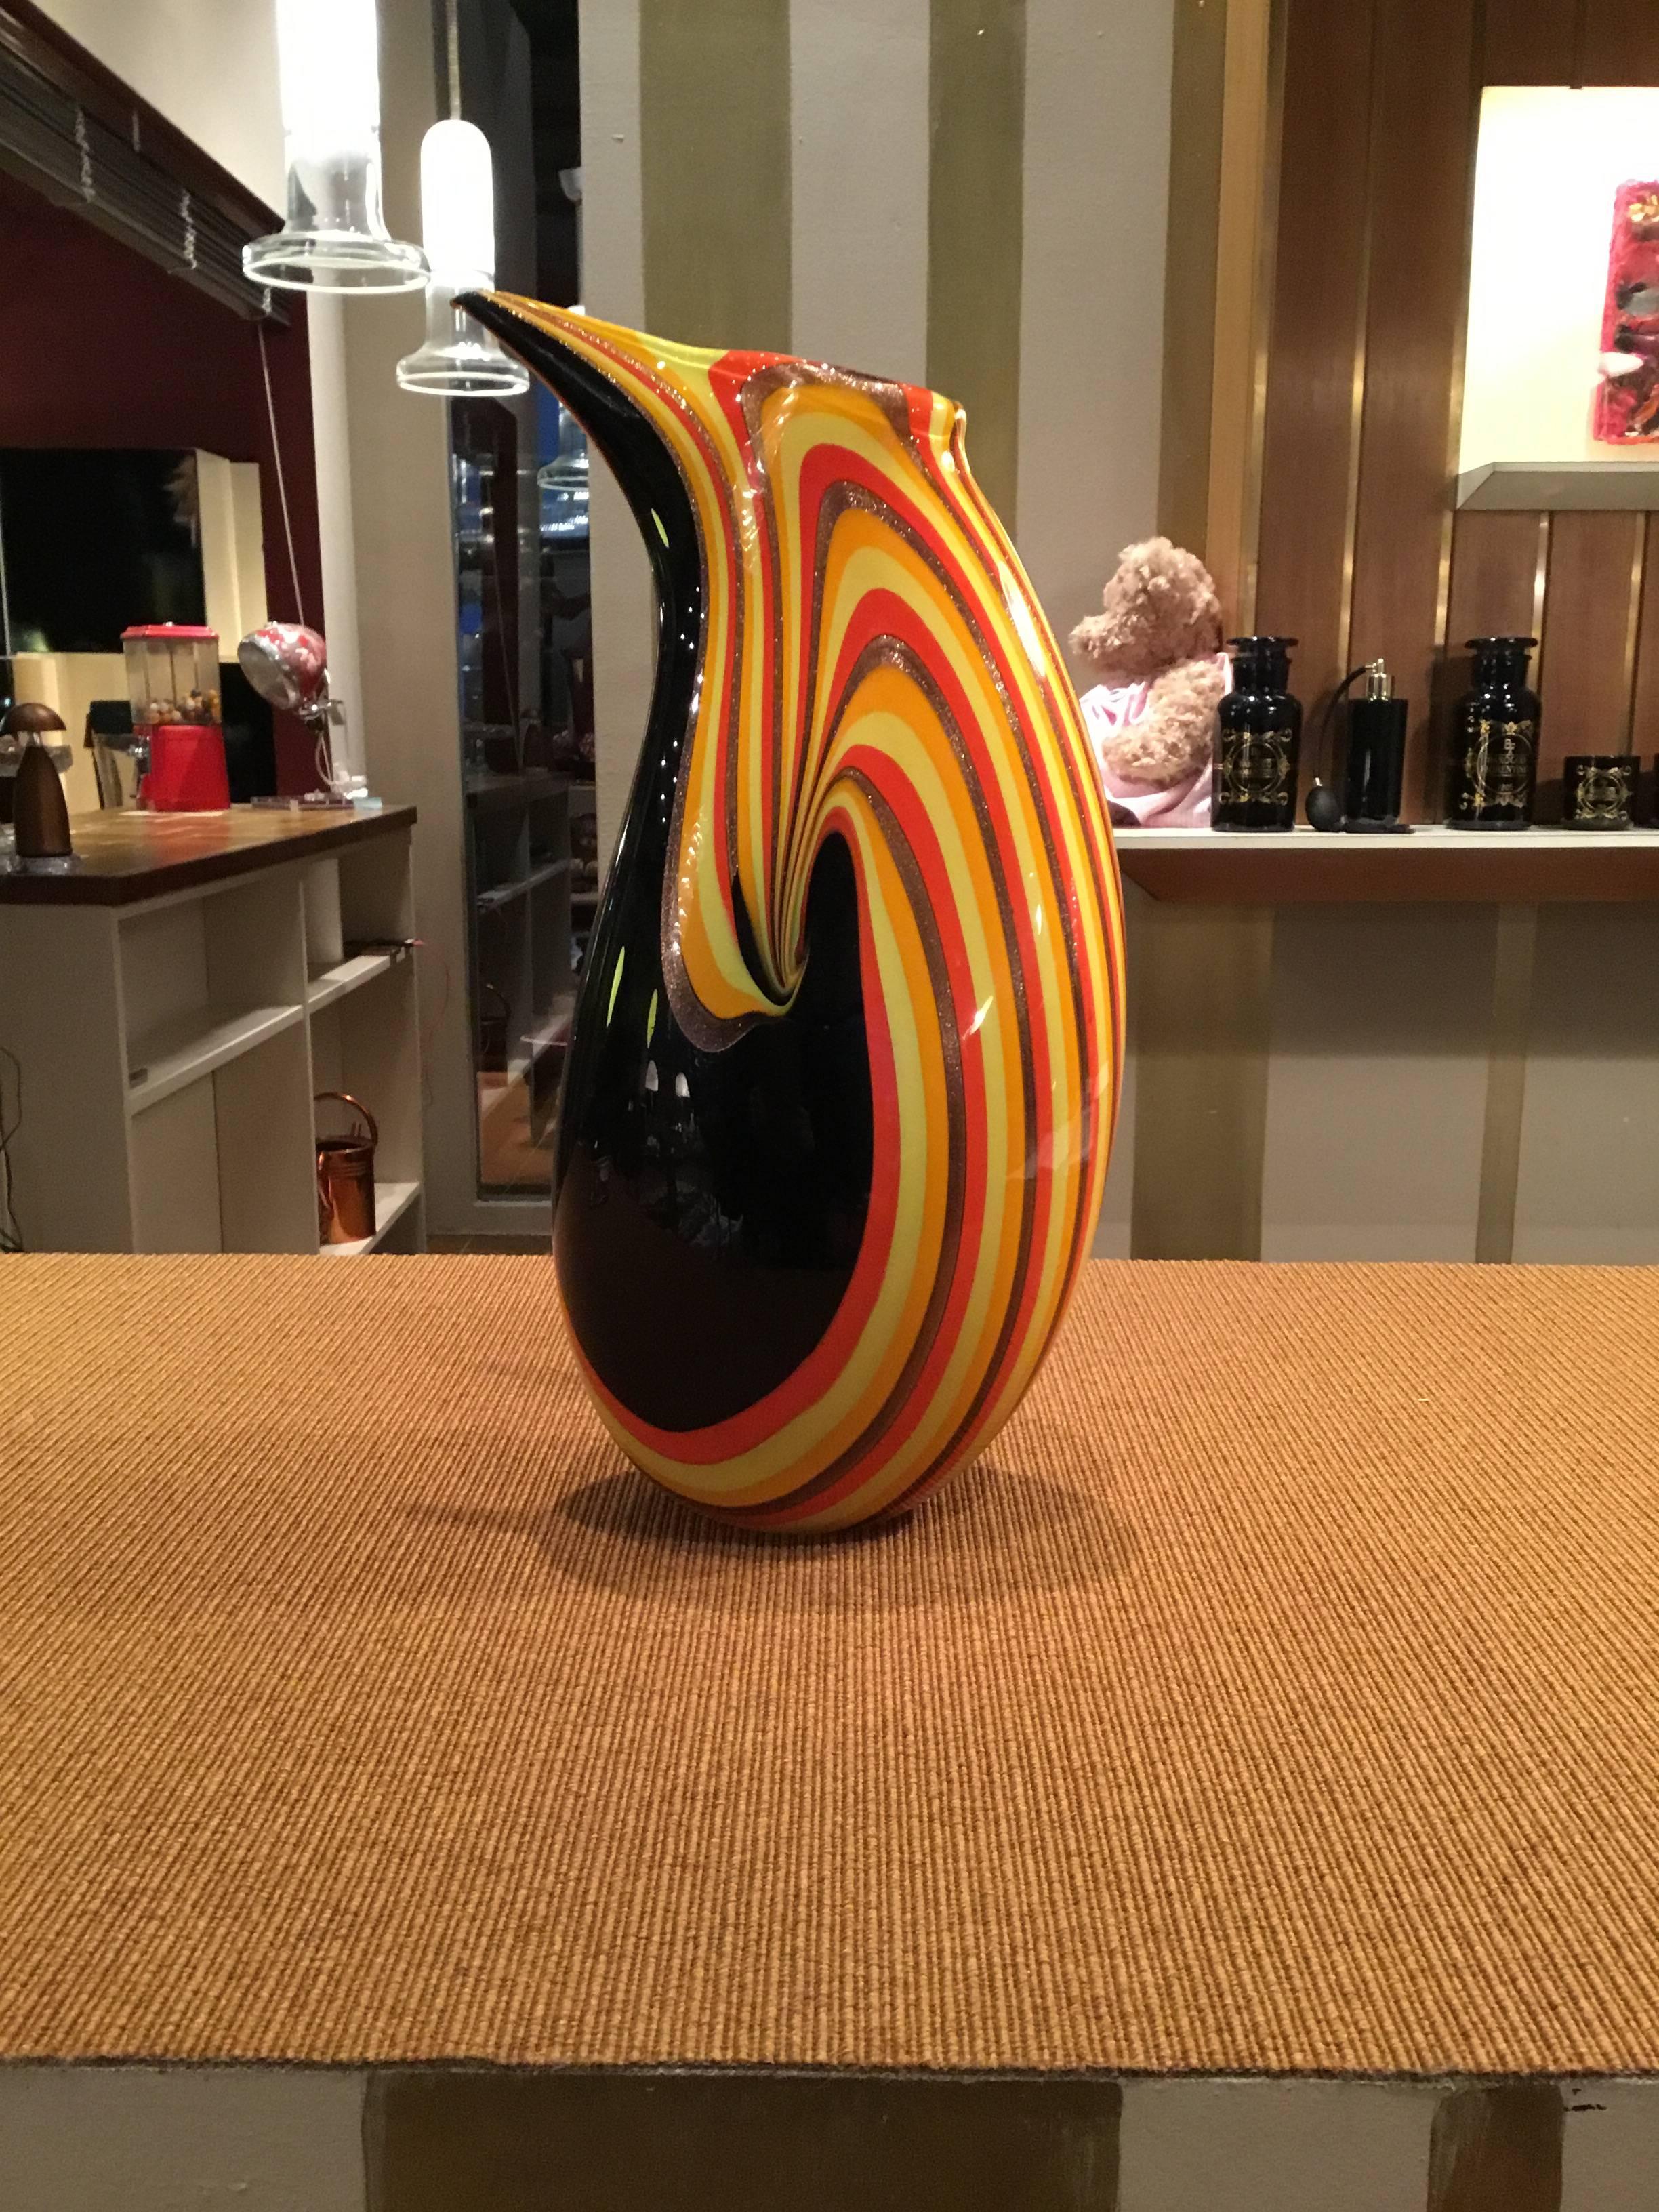 Blown glass vase by Paolo Crepax, Venice, Italy.
Measures: H 52.5 cm.